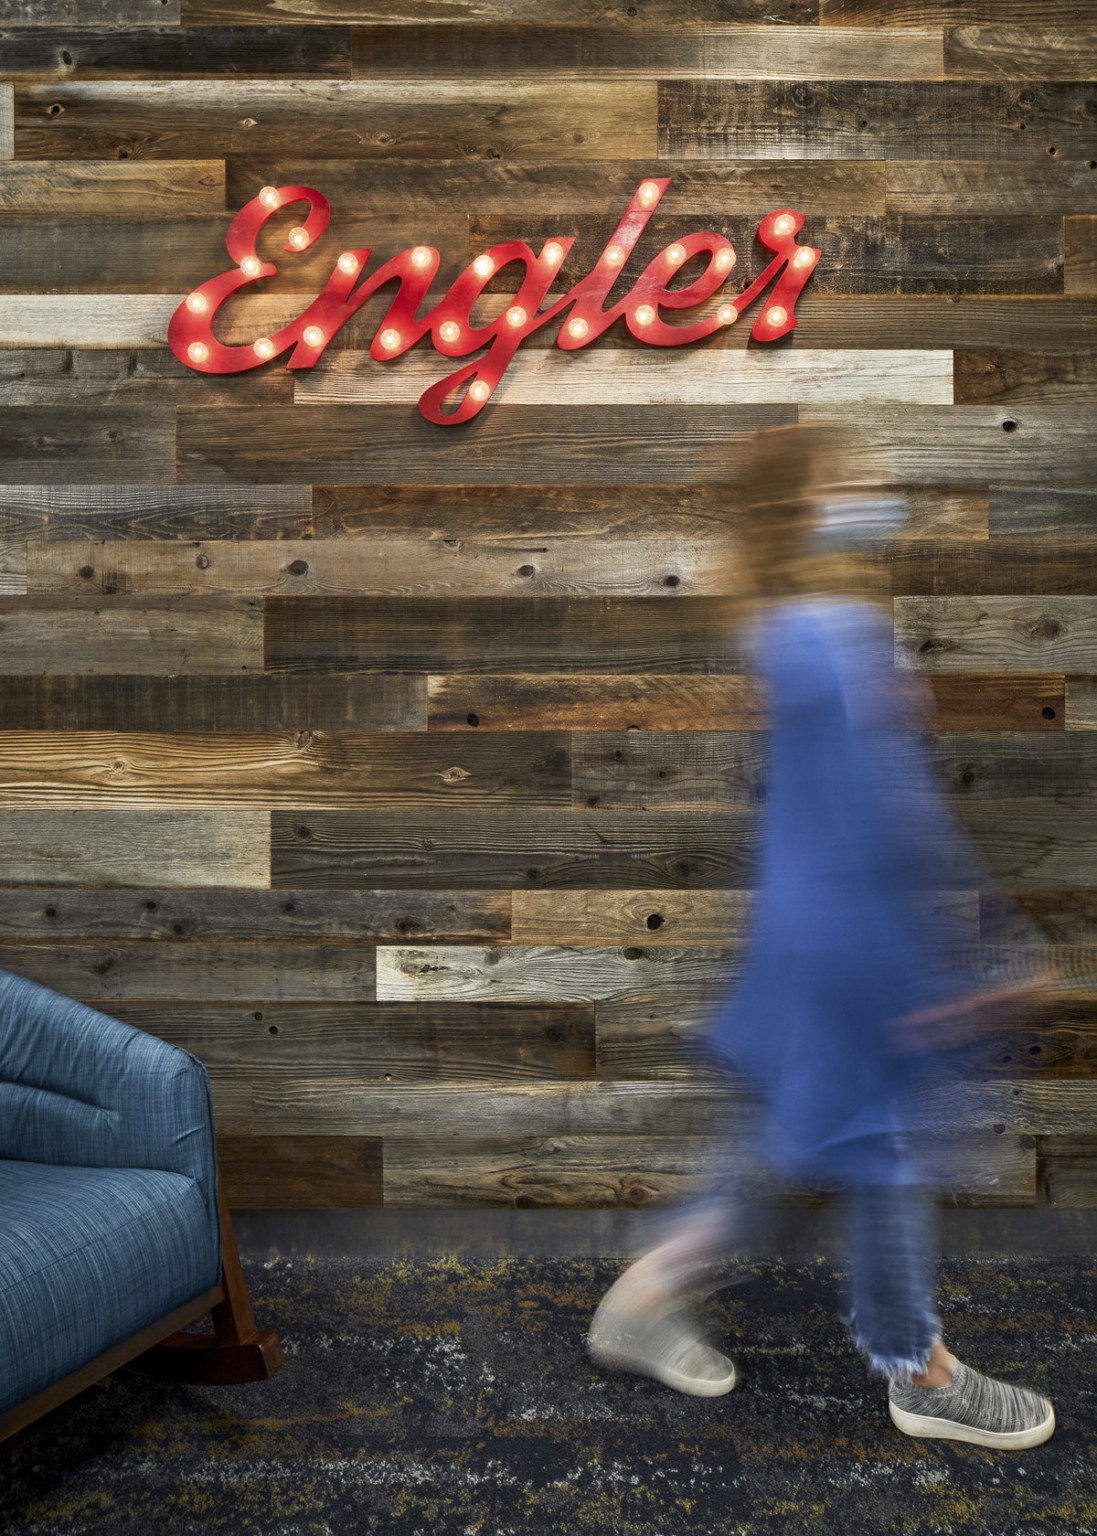 Wood panel wall with red script sign reading Engler, lit with small bulbs. Below, a blue armchair on carpet